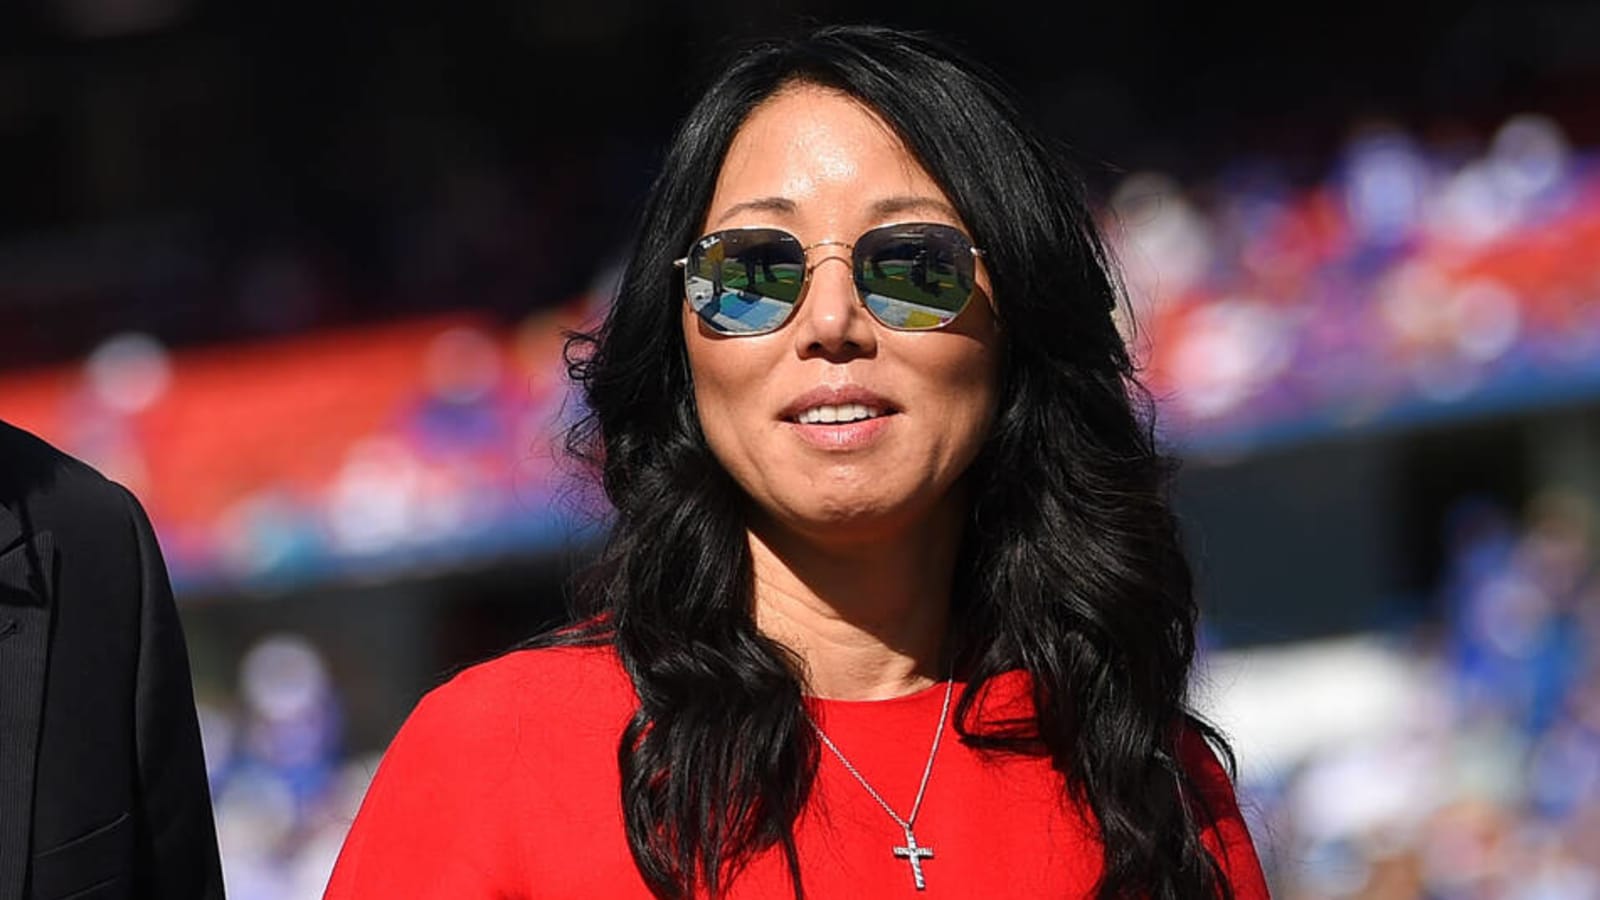 Kim Pegula 'progressing well' from undisclosed health issues